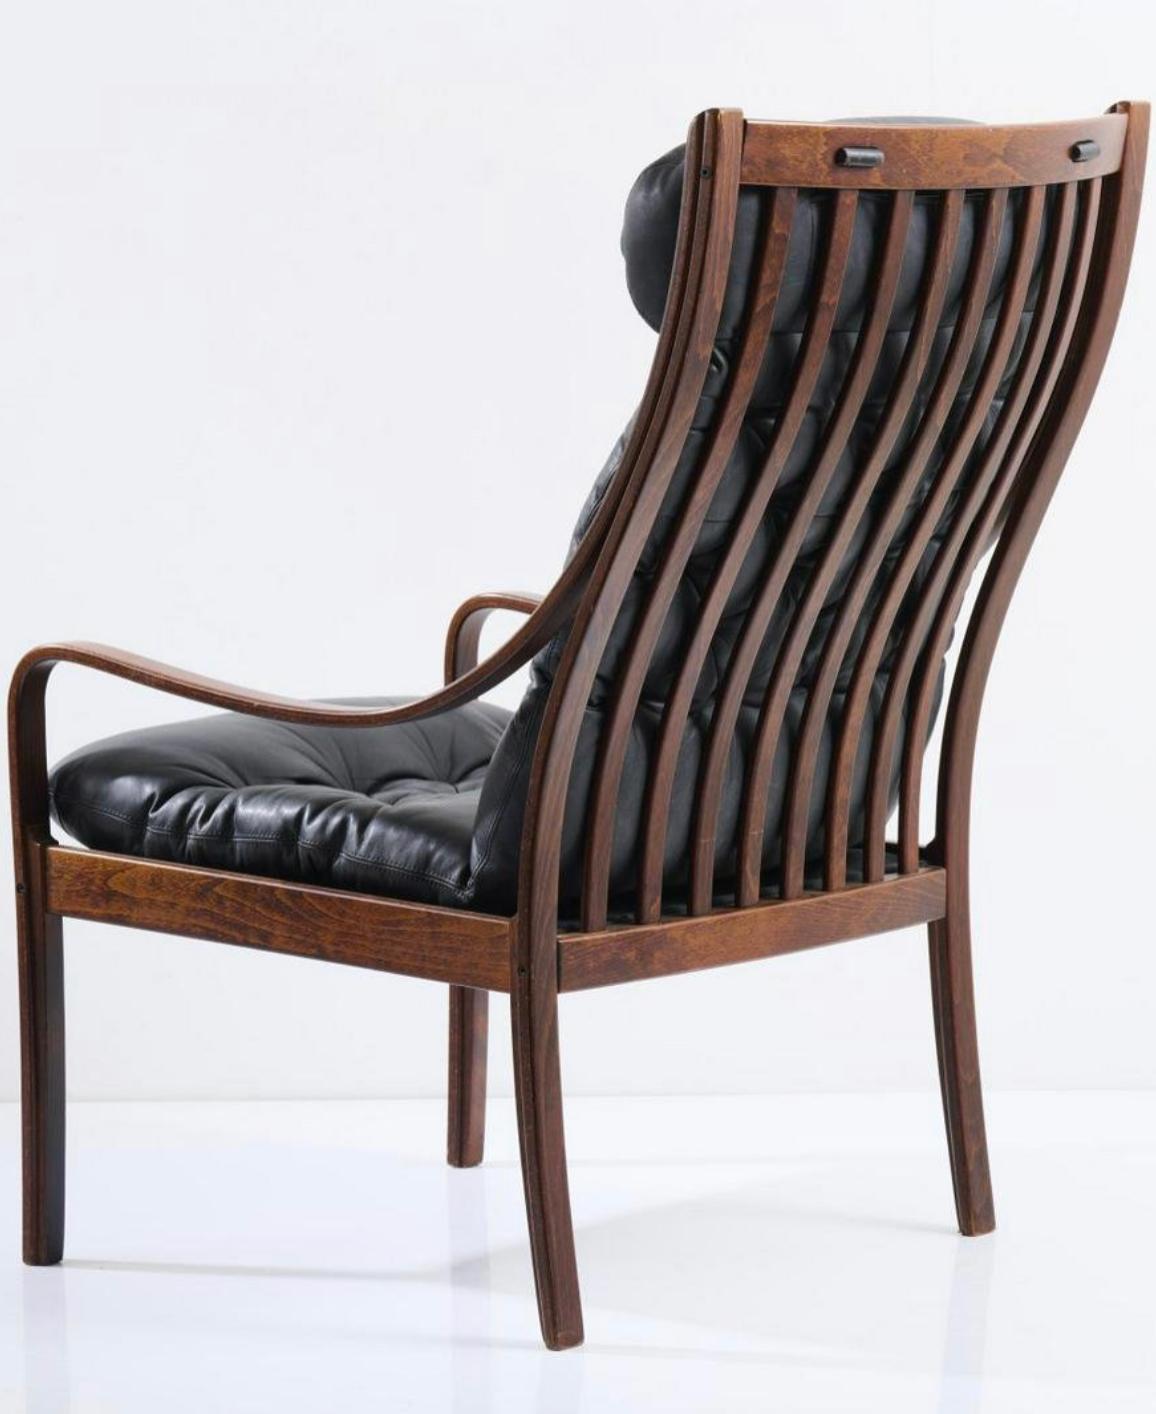 Experience the epitome of mid-century modern design with this stunning Fredrik A. Kayser armchair, produced by Vatne Möbler in the early 1960s. The highback armchair features a black leather upholstery and a stained elmwood frame, creating a